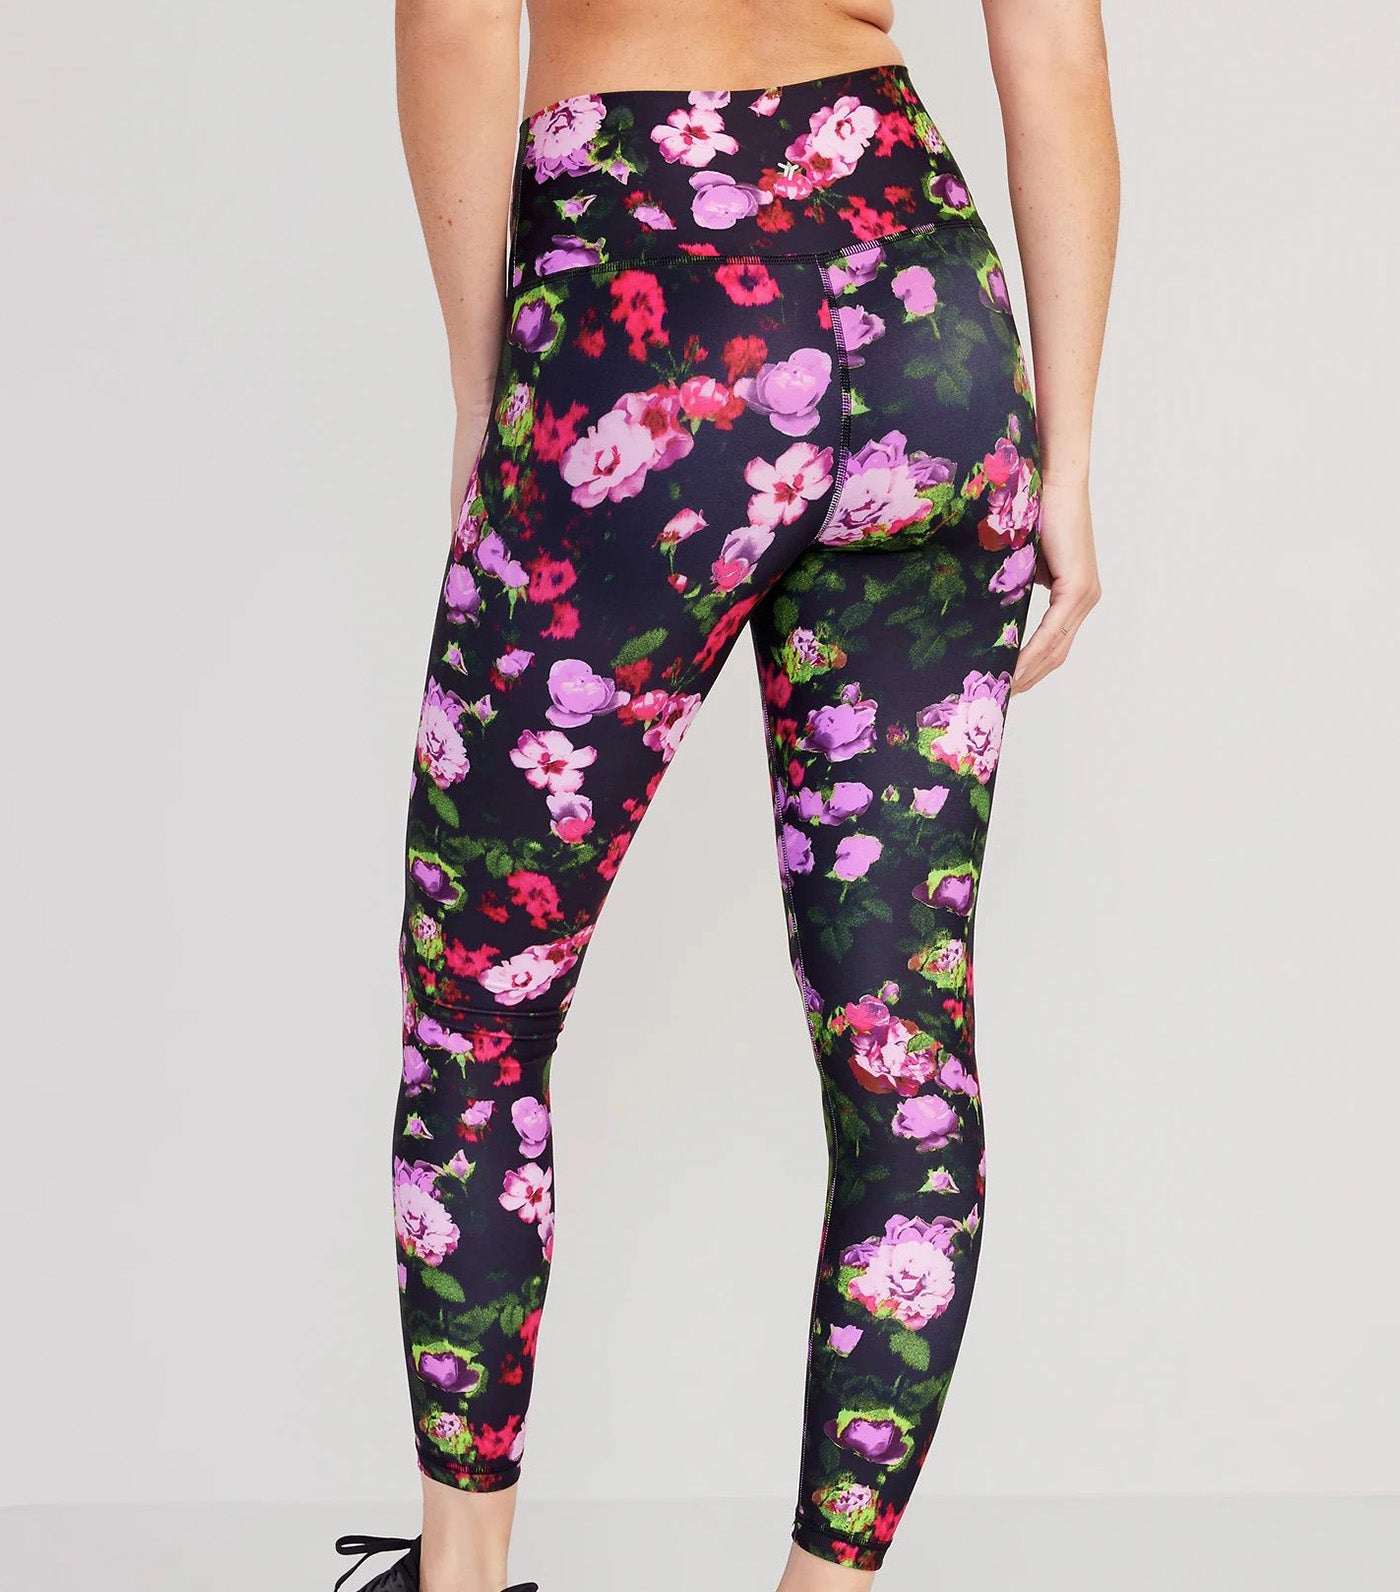 Old Navy High-Waisted PowerSoft 7/8-Length Leggings for Women Black Gray  Floral